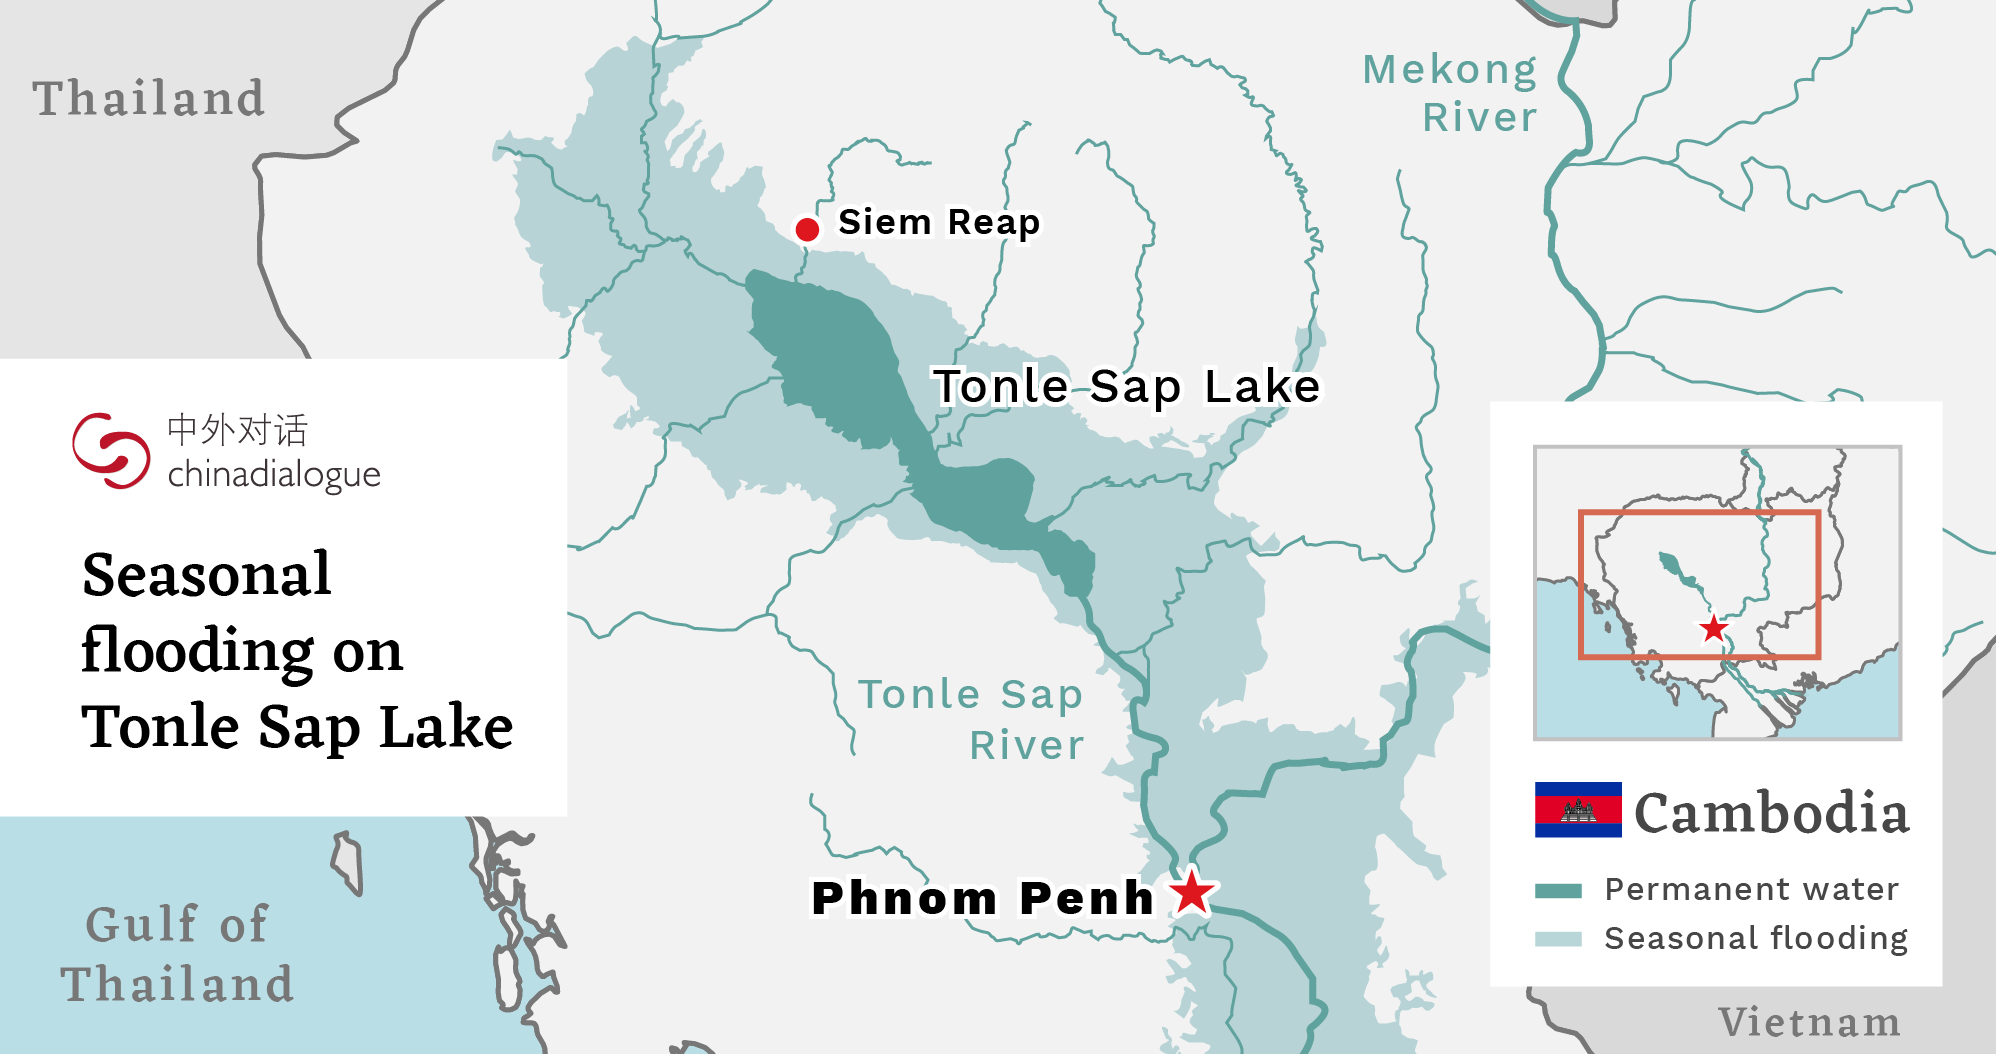 map of Tonle sap lake, Cambodia, showing areas affected by seasonal flooding